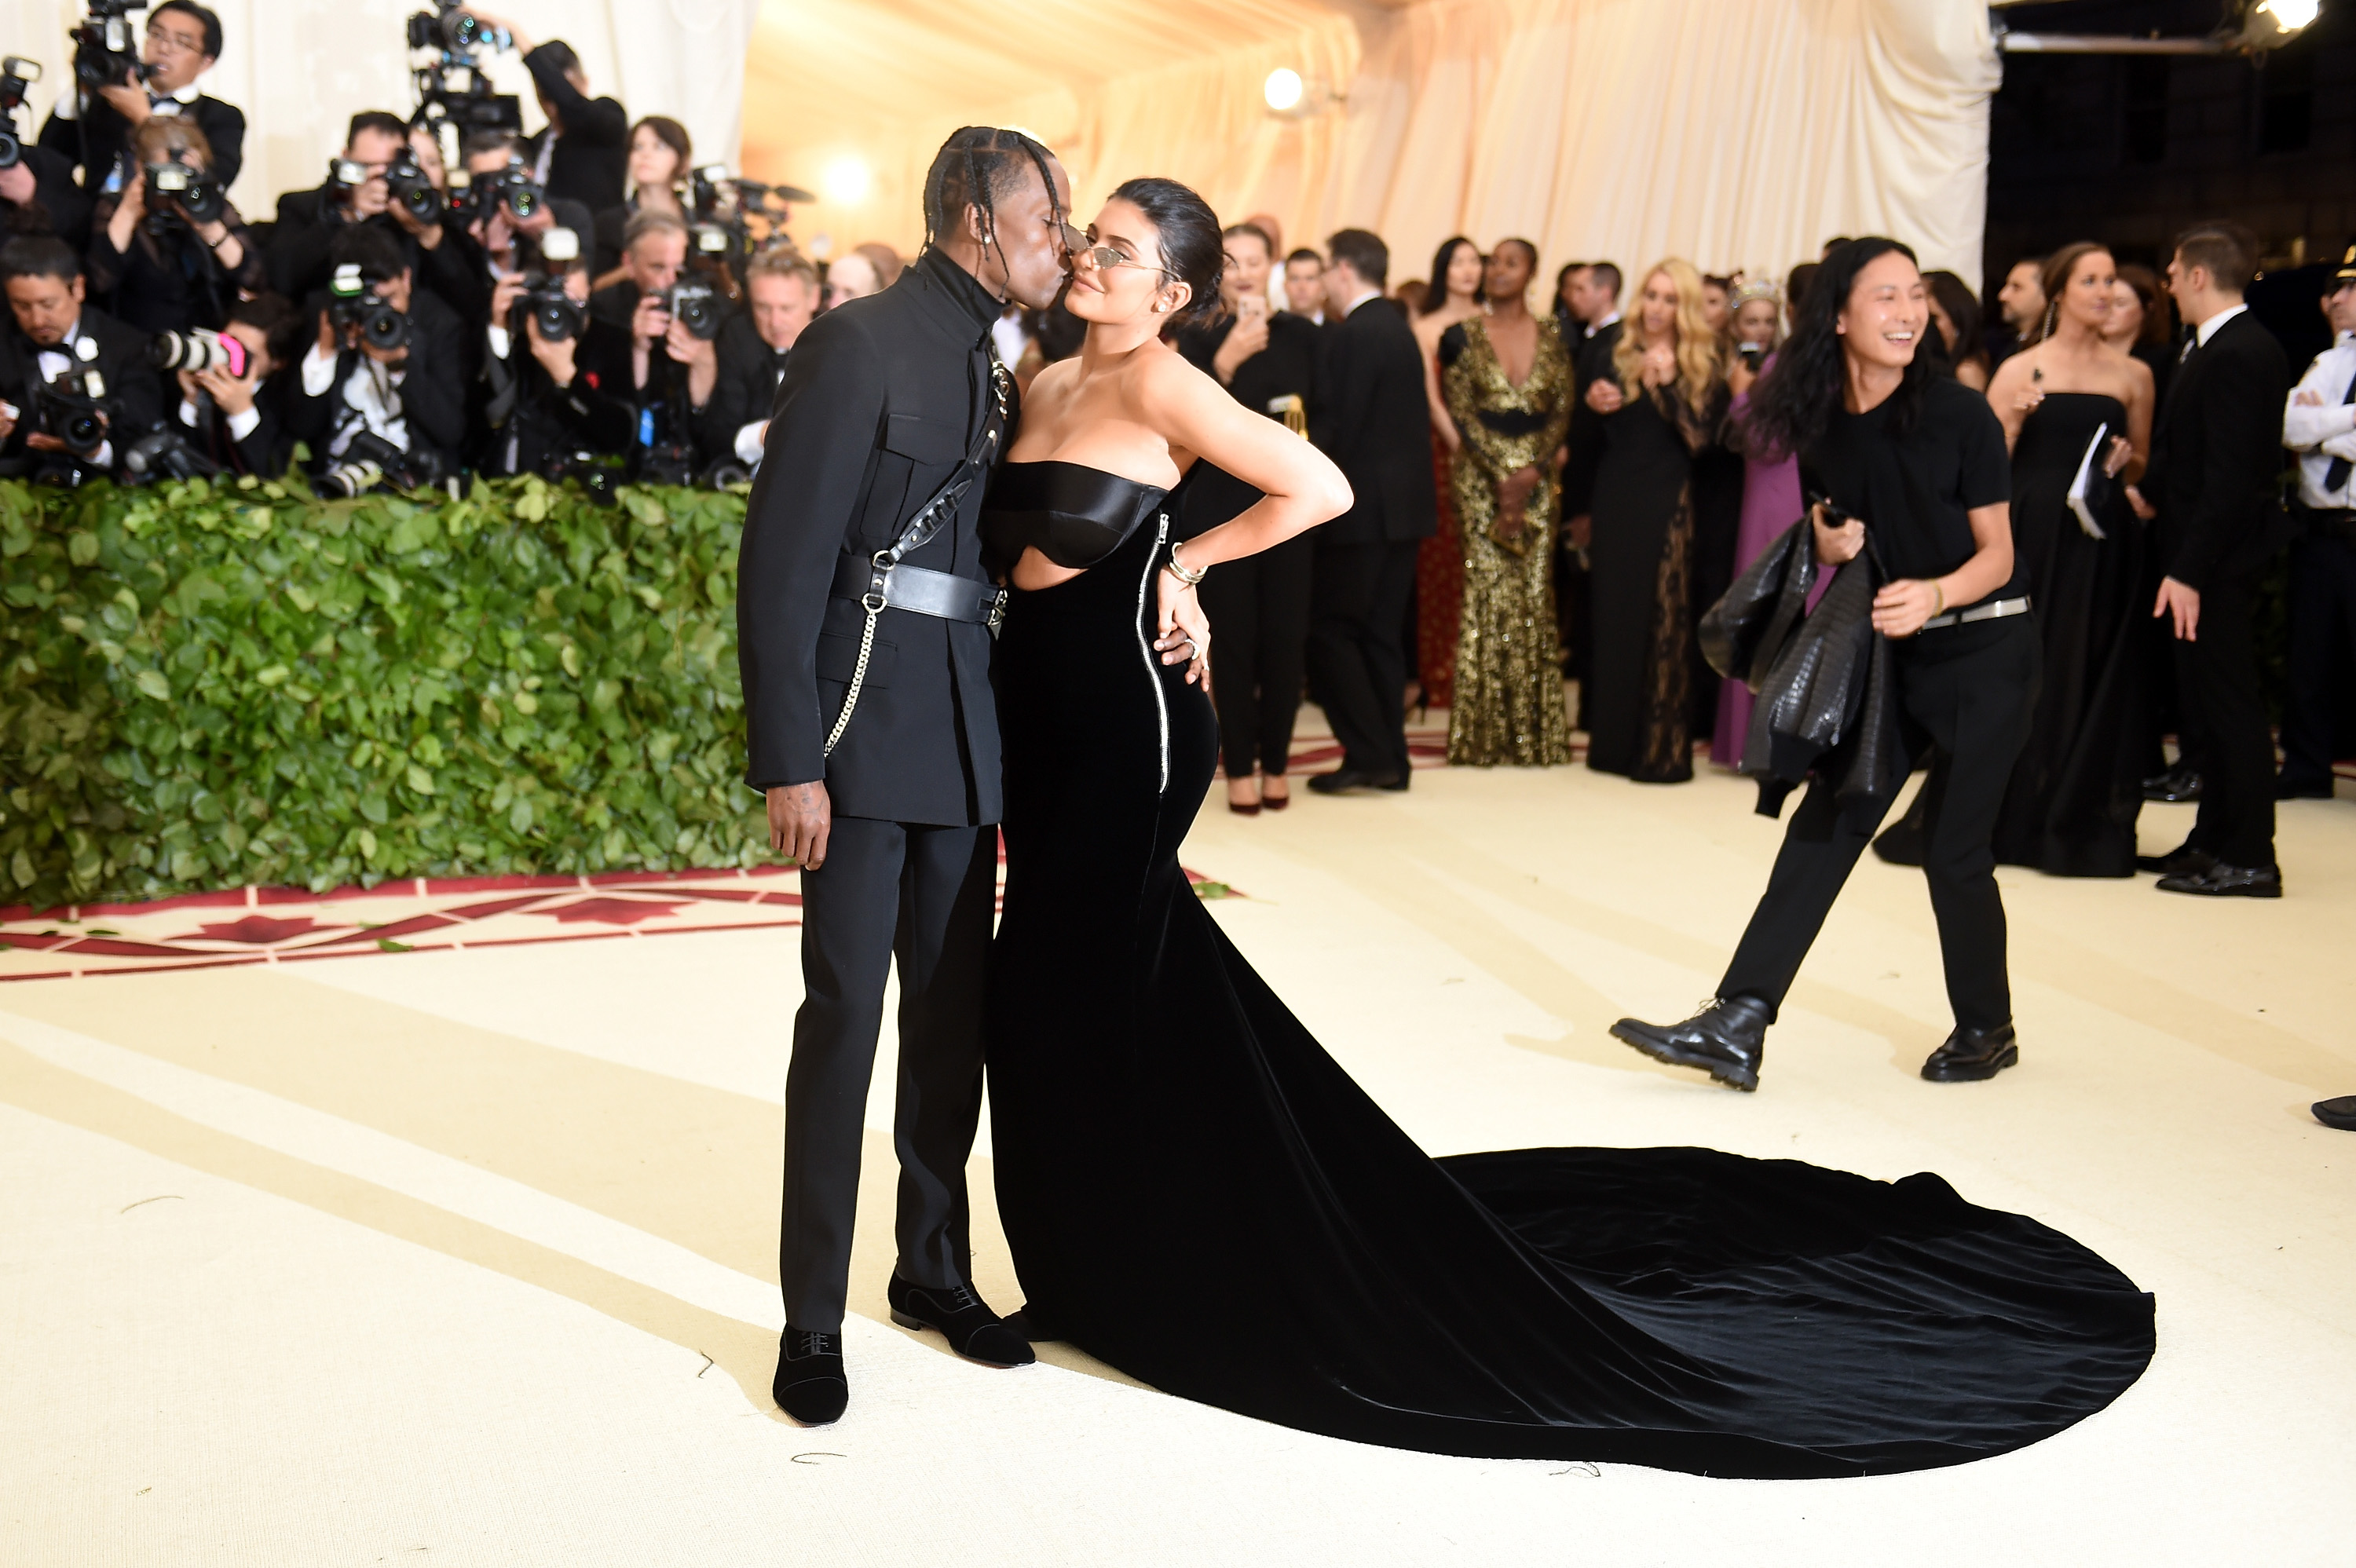 Travis Scott and Kylie Jenner, pictured in 2018, attend the Met Gala in New York City